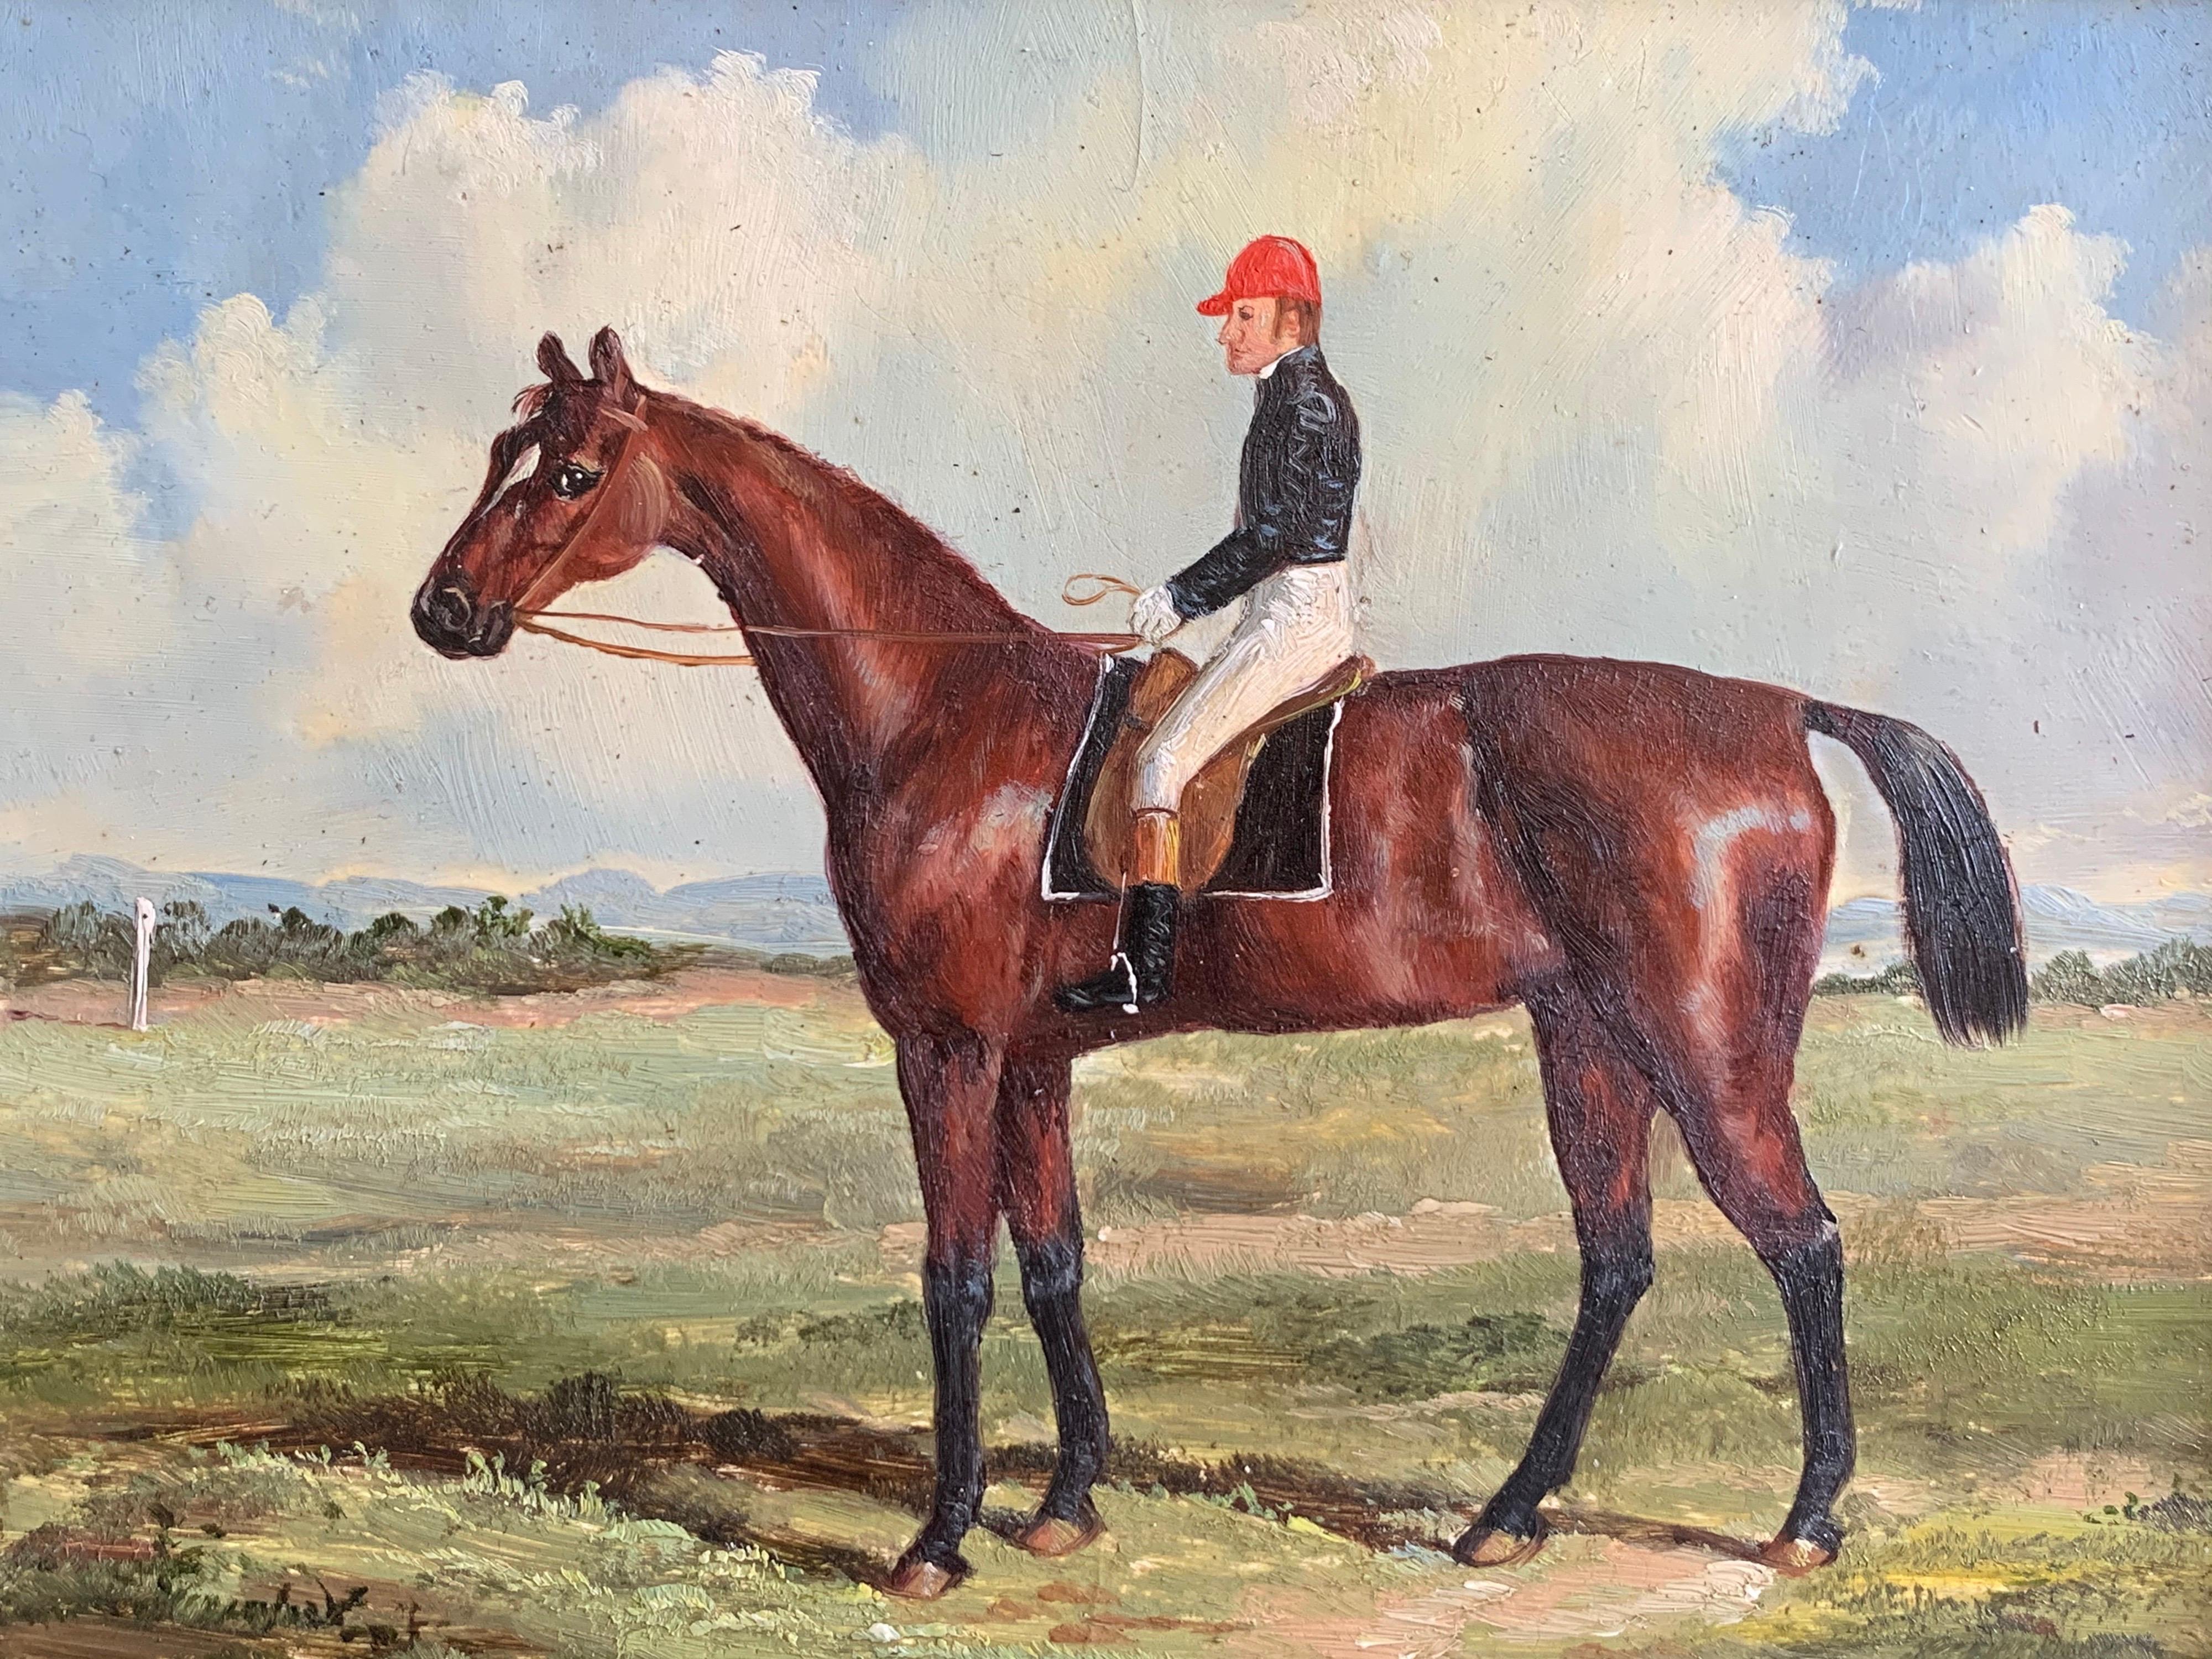 Racehorses with Jockeys Up
English School, 20th century
pair of oil paintings on panel, framed

each framed size: 6 x 8 inches
provenance: 
private collection, England

Offering superb interior decoration for a classic interior with a sporting